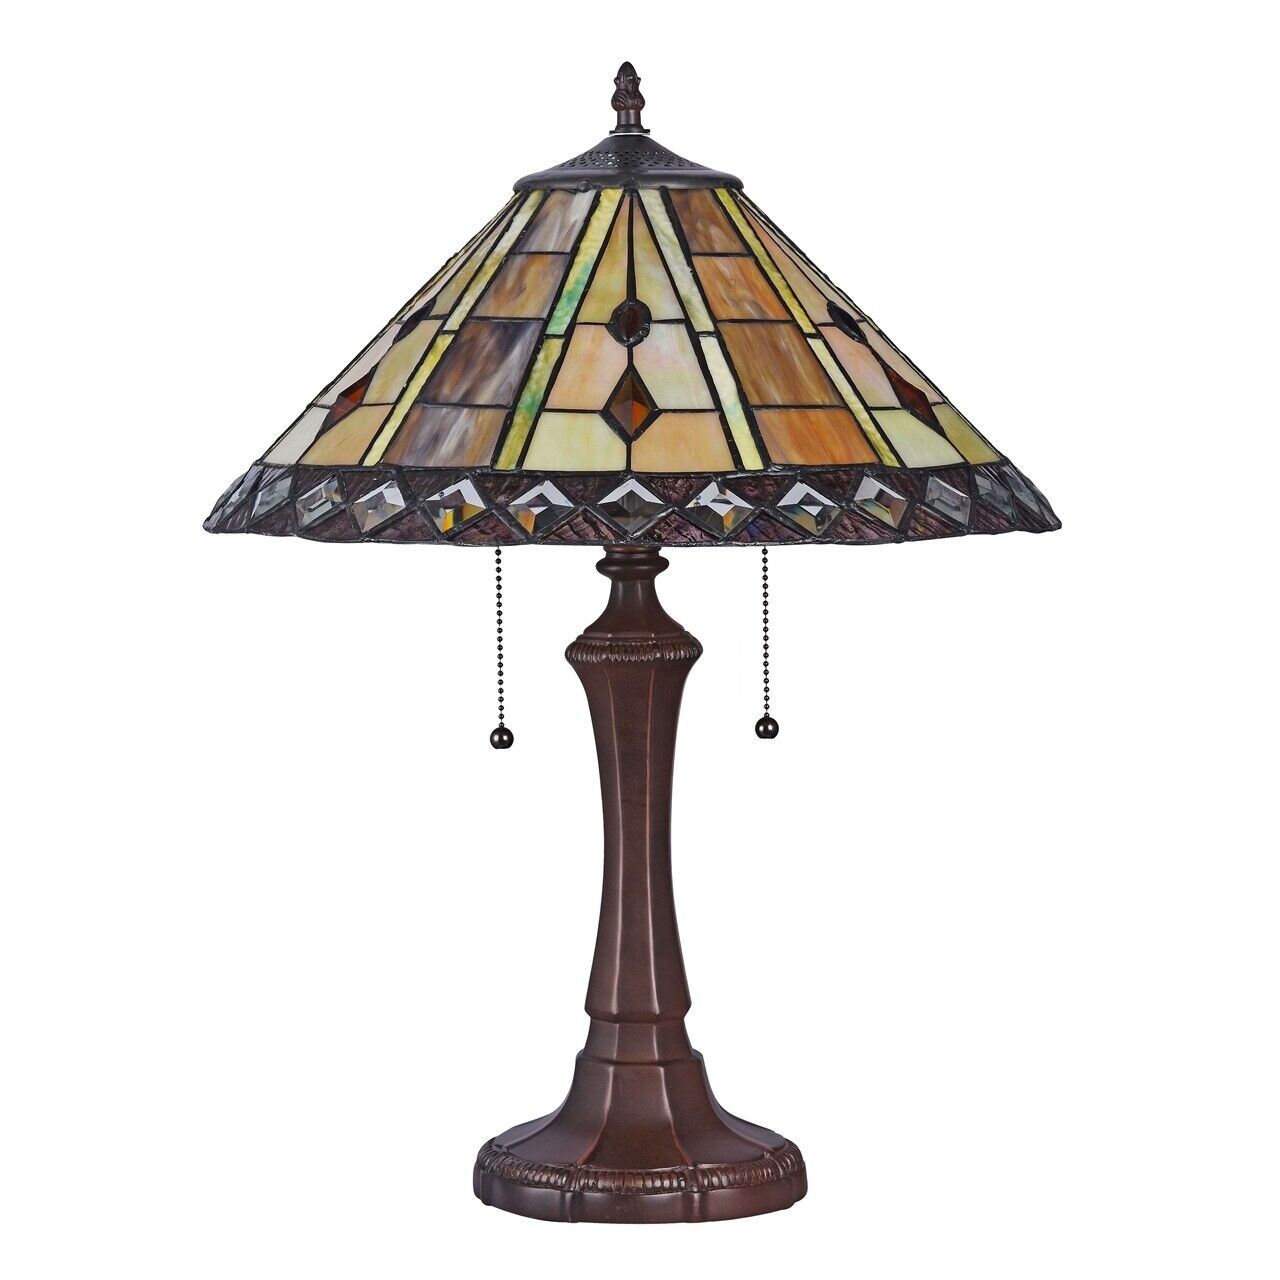 21.7" Antique Vintage Style Stained Glass Table Lamp